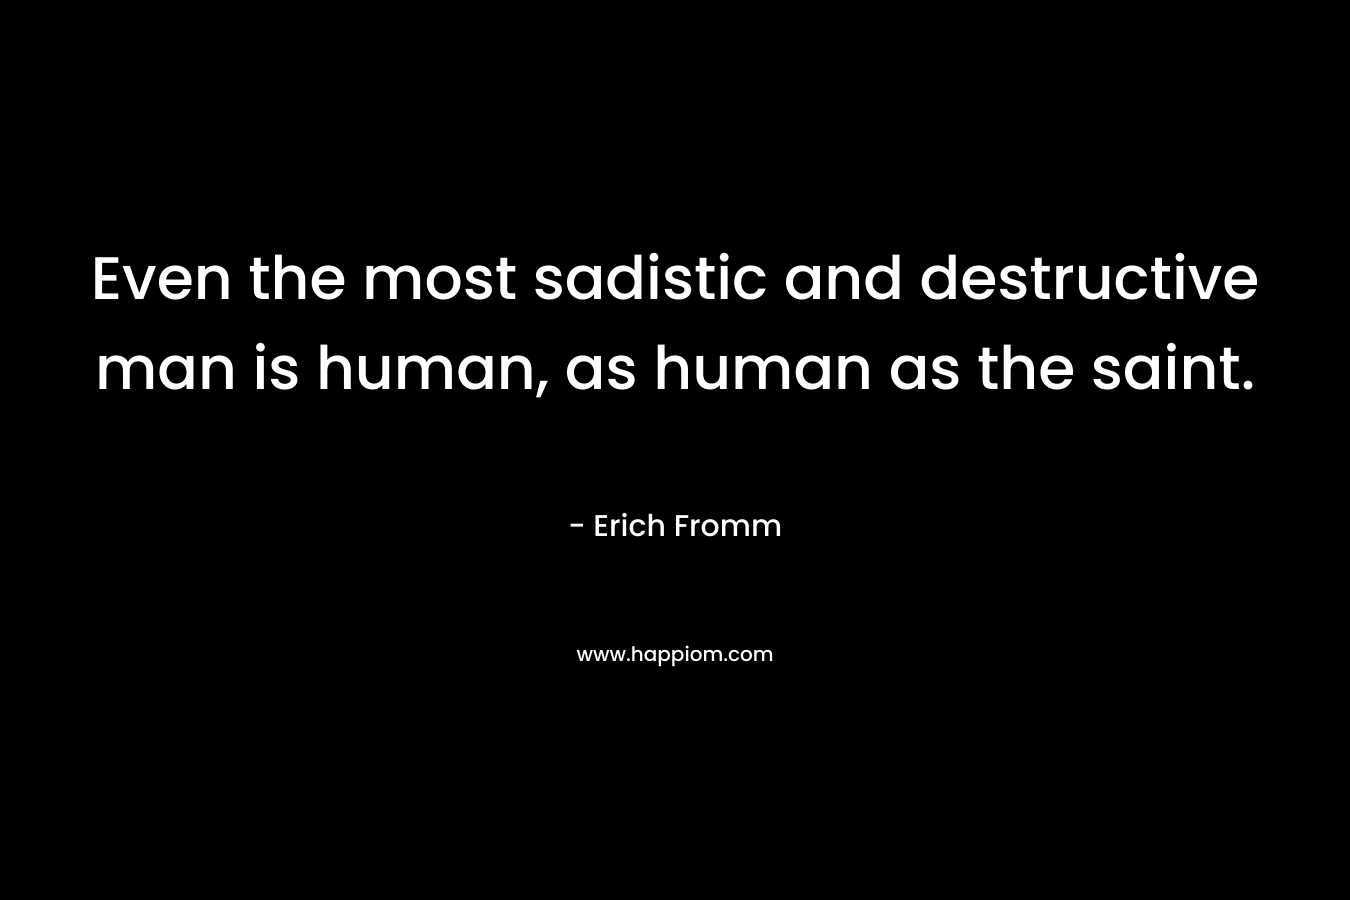 Even the most sadistic and destructive man is human, as human as the saint.